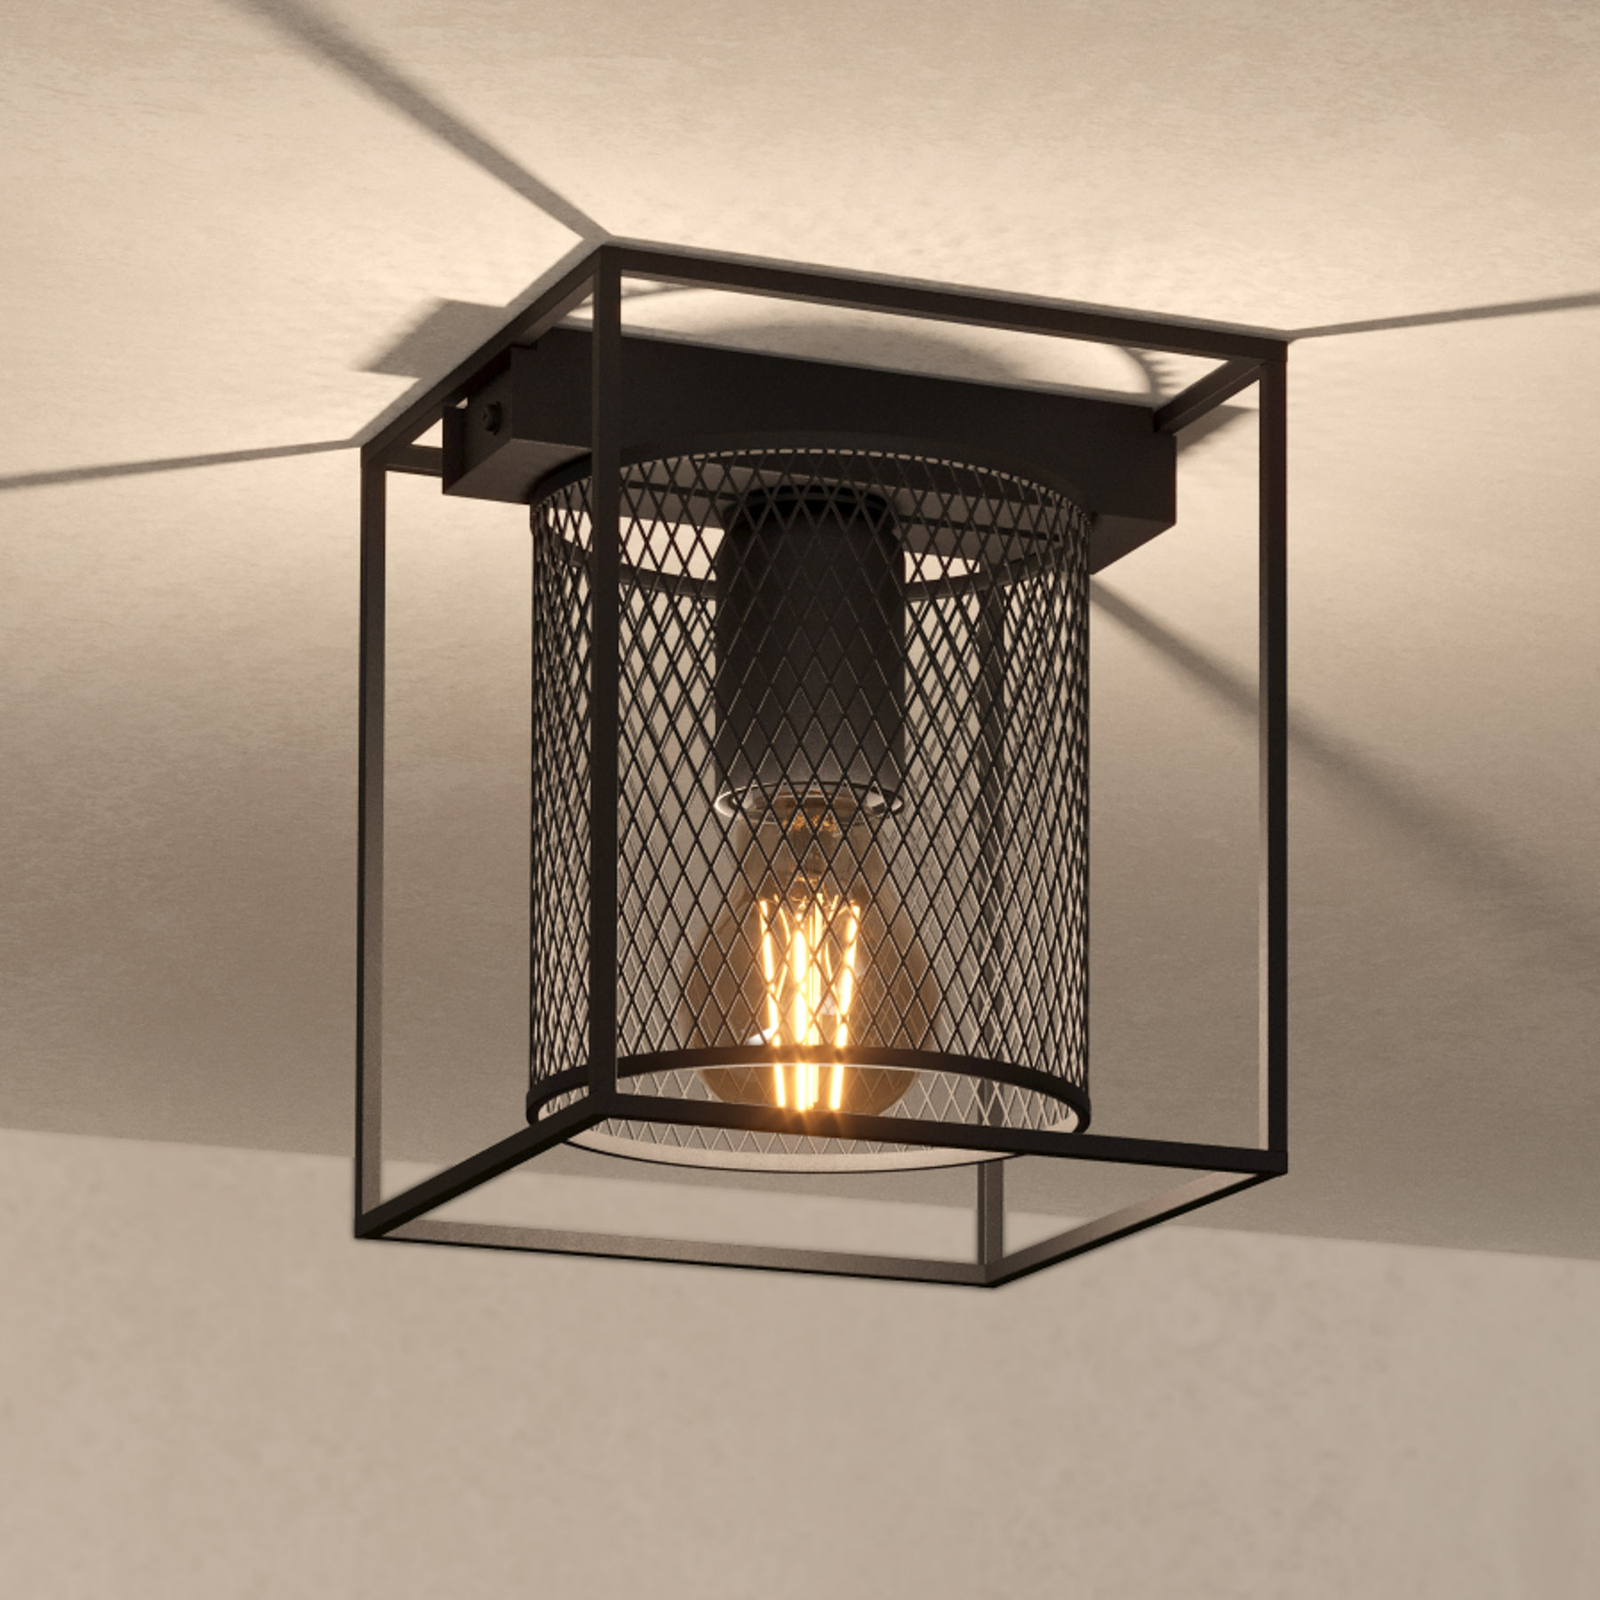 Catterick ceiling light, black, cage lampshade